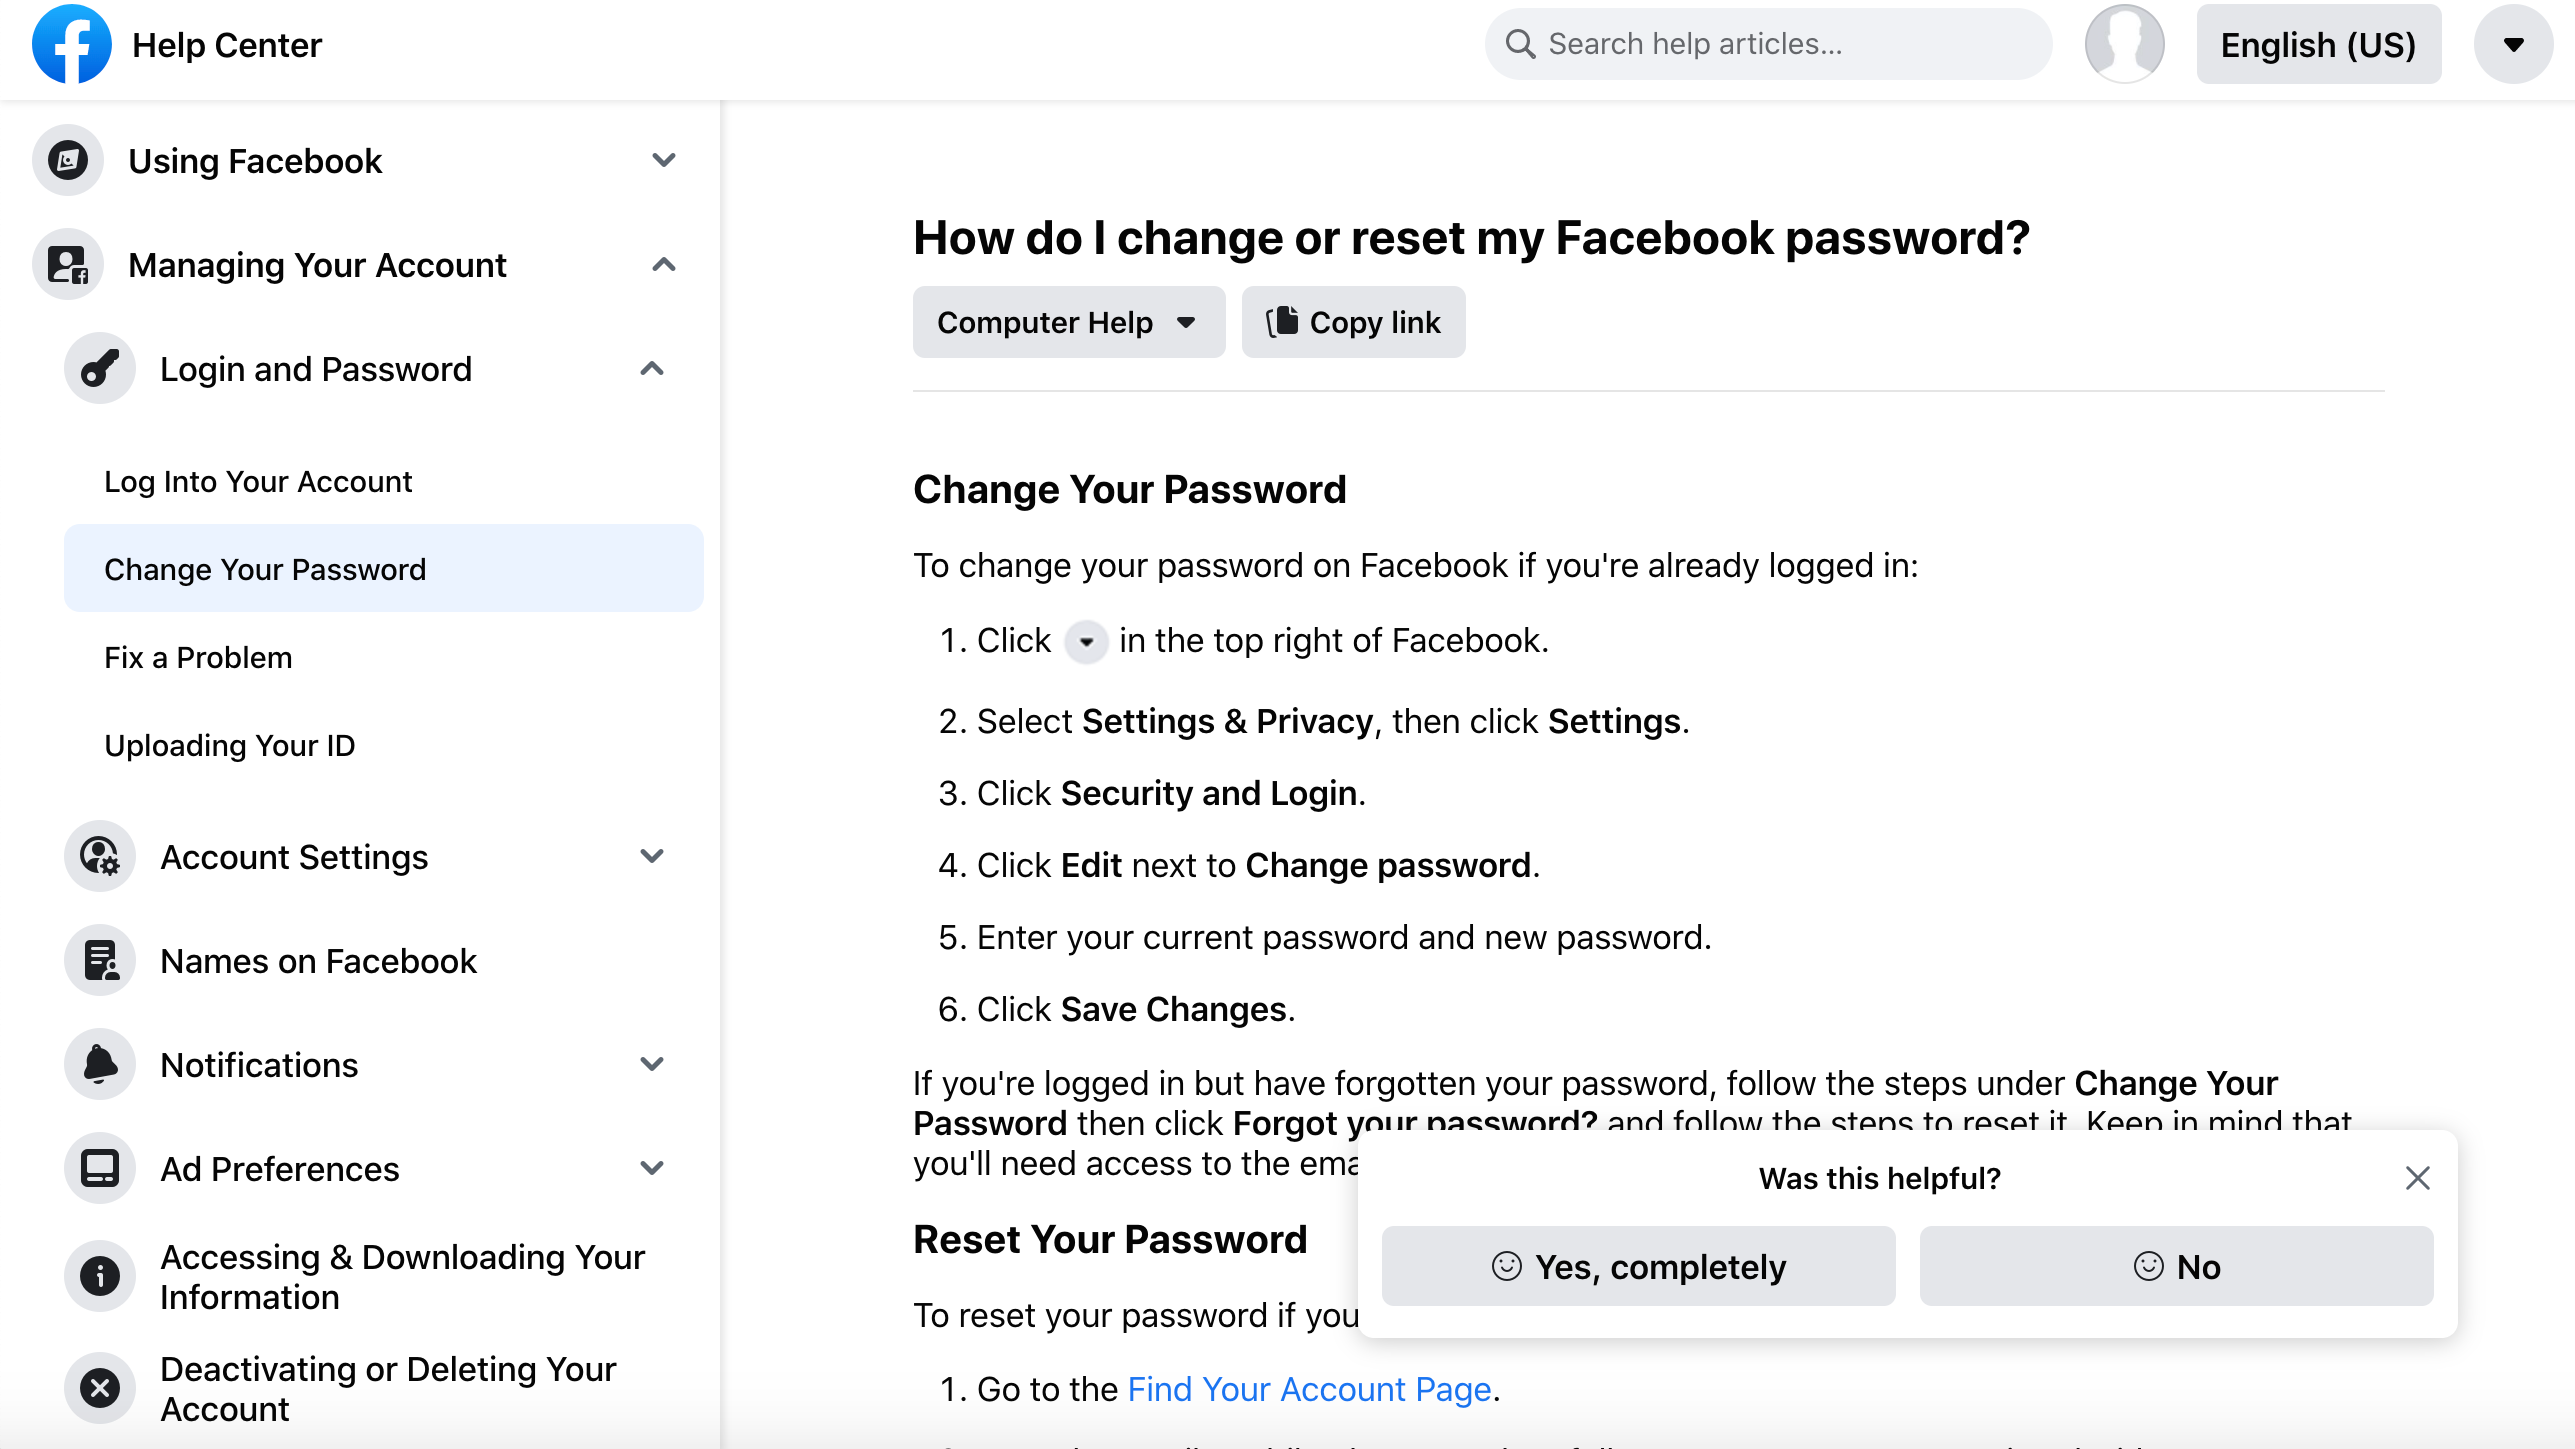 how to search Facebook help center